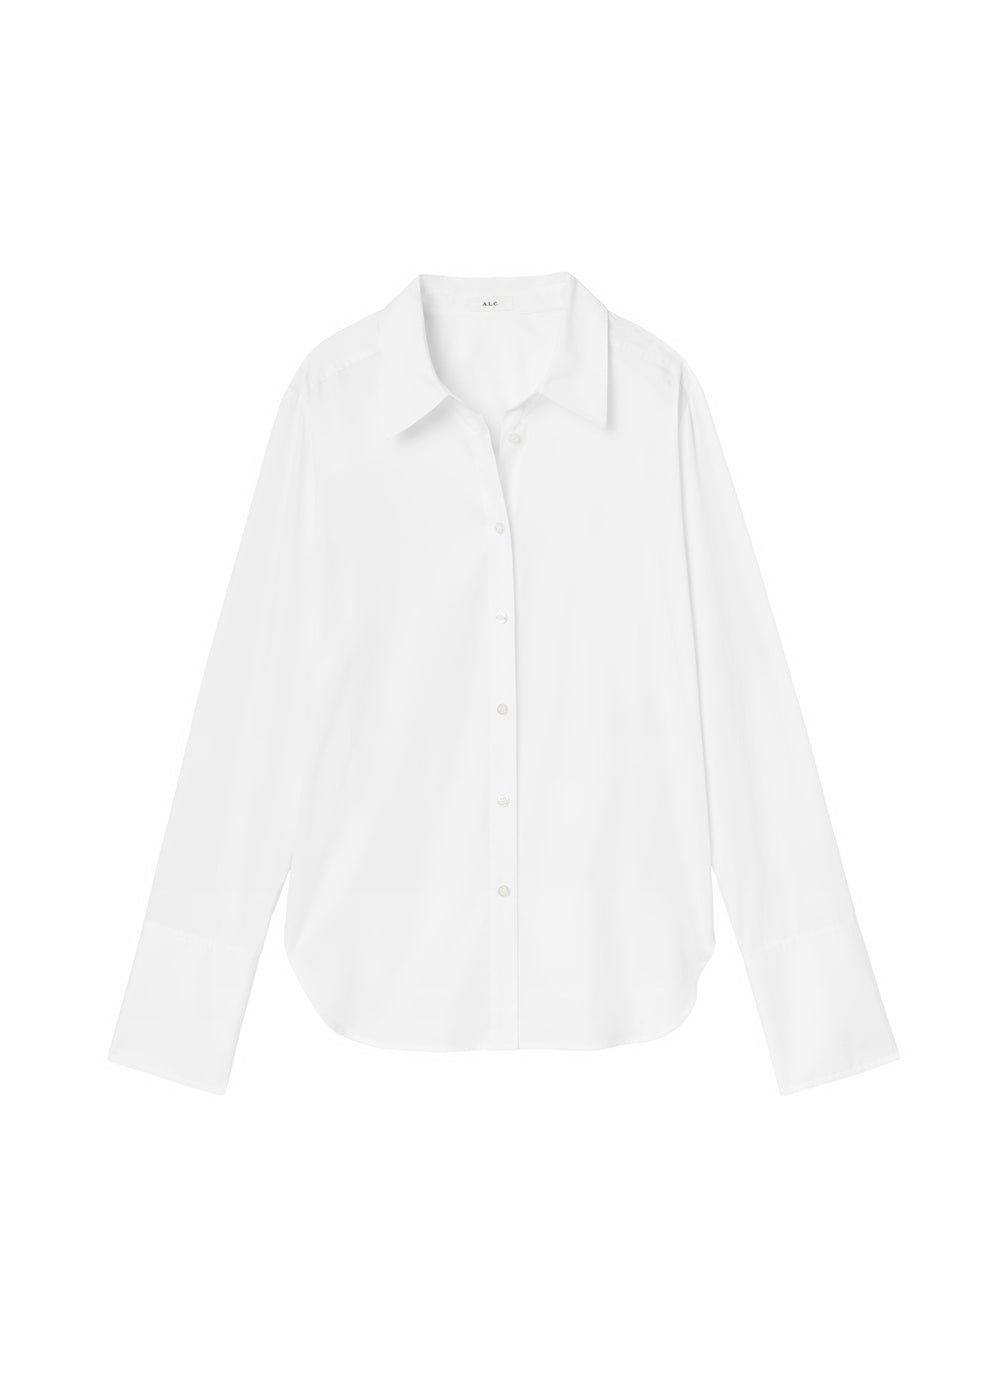 flatlay of white button down collared shirt